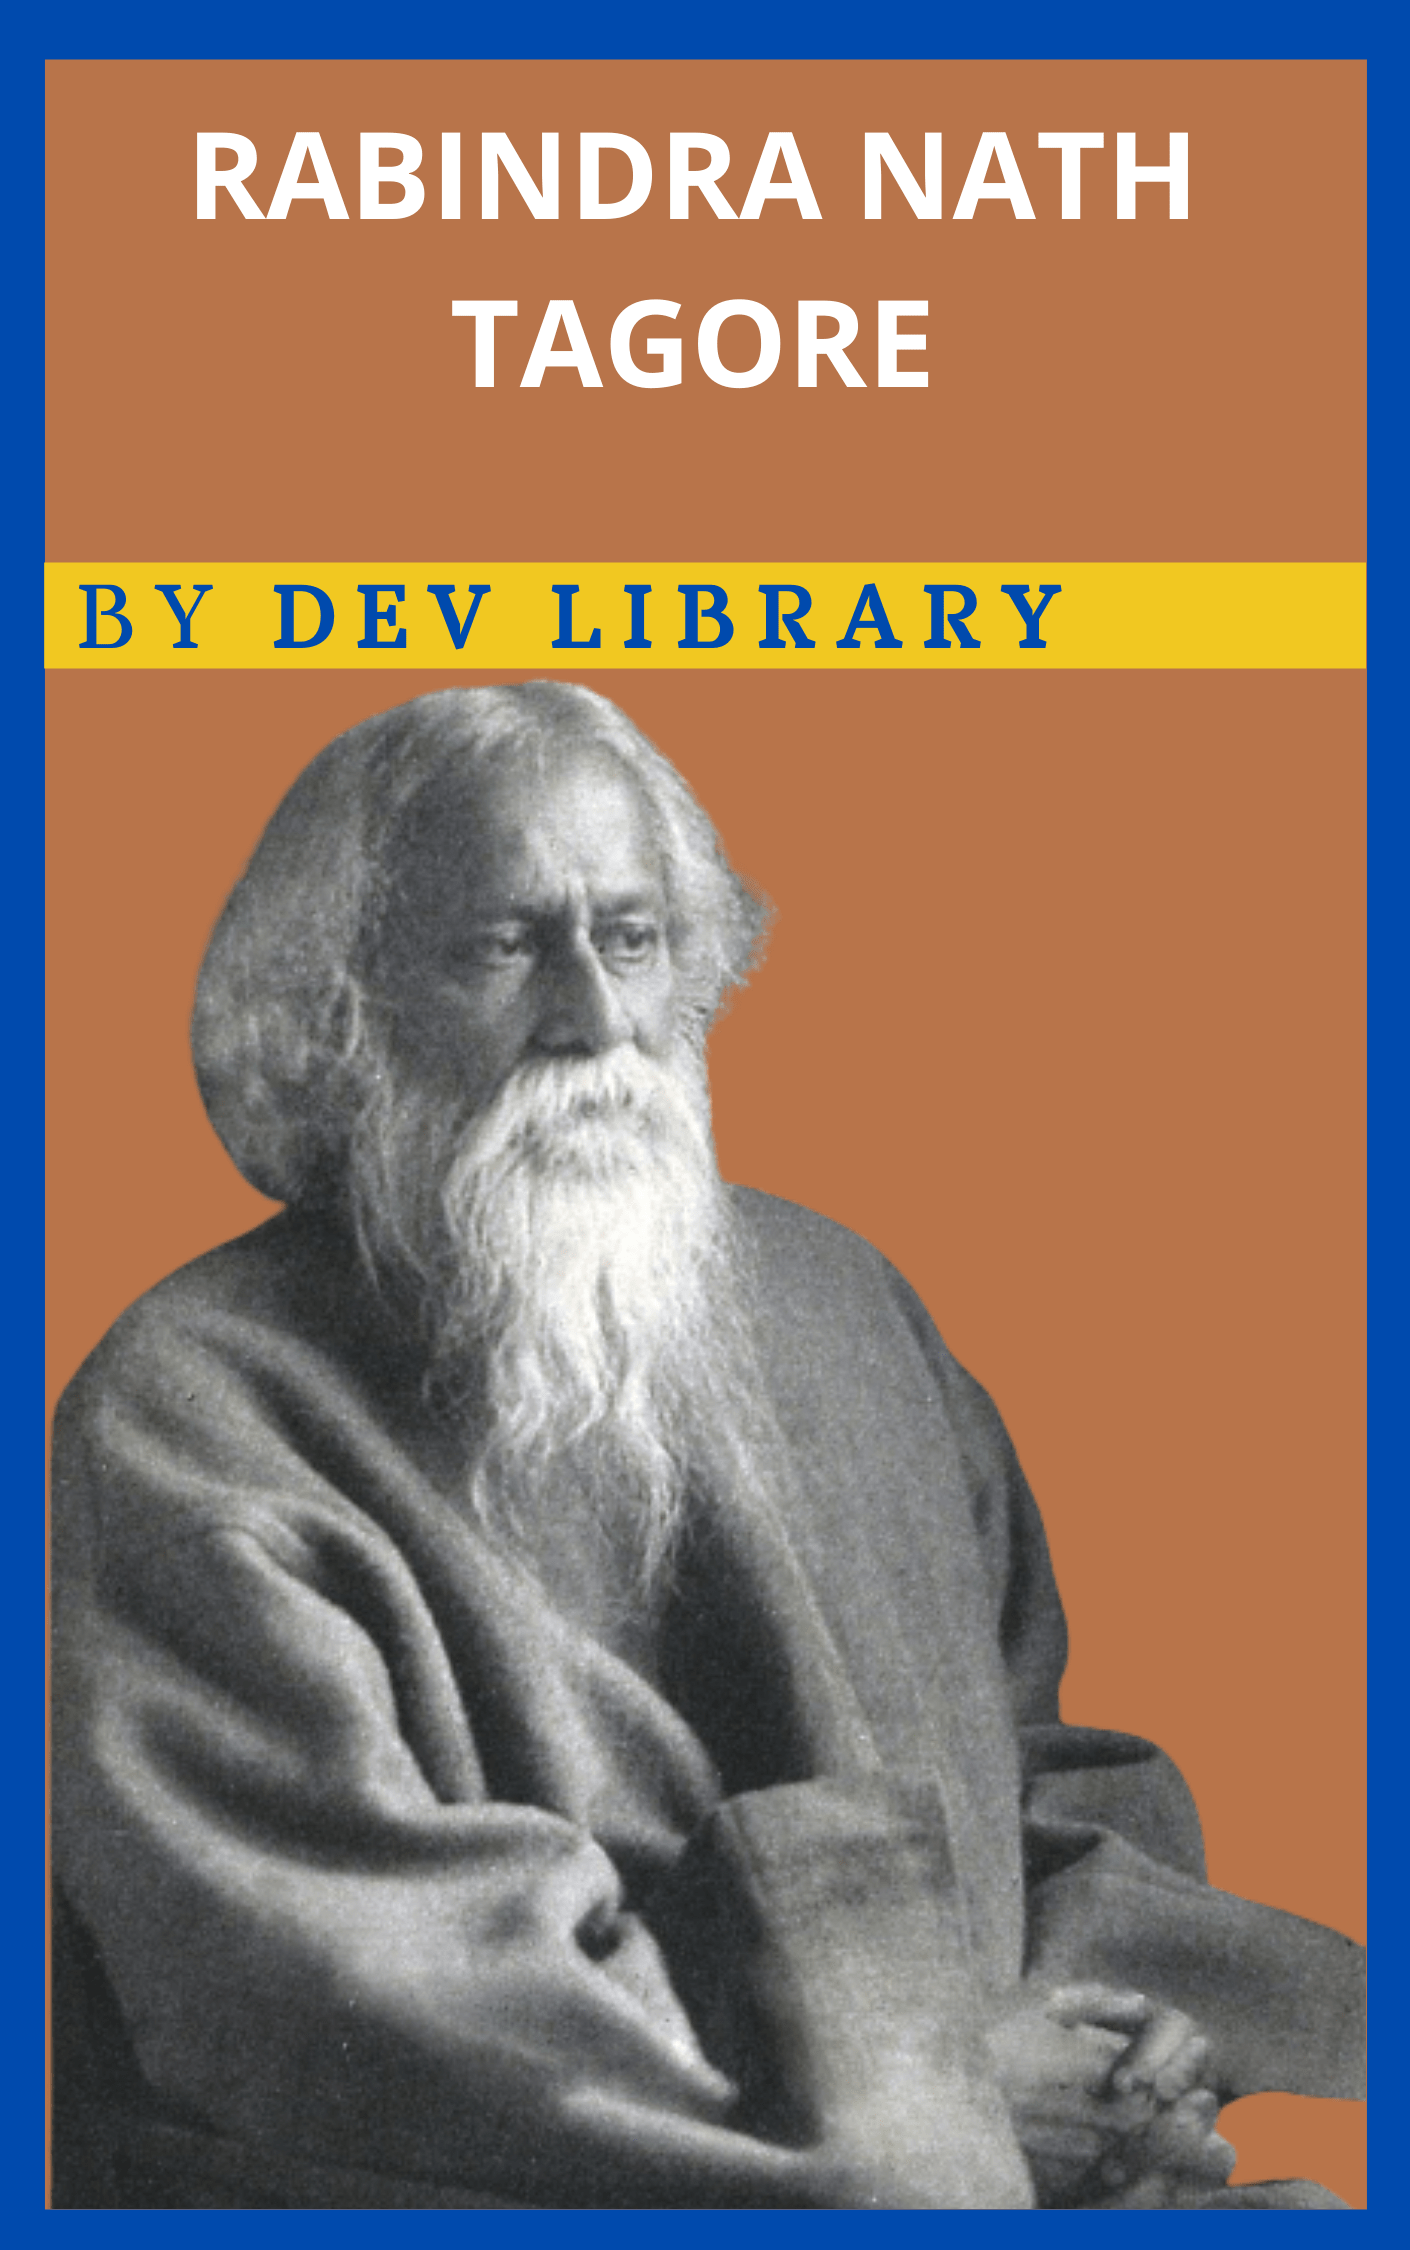 biography of rabindranath tagore for class 5